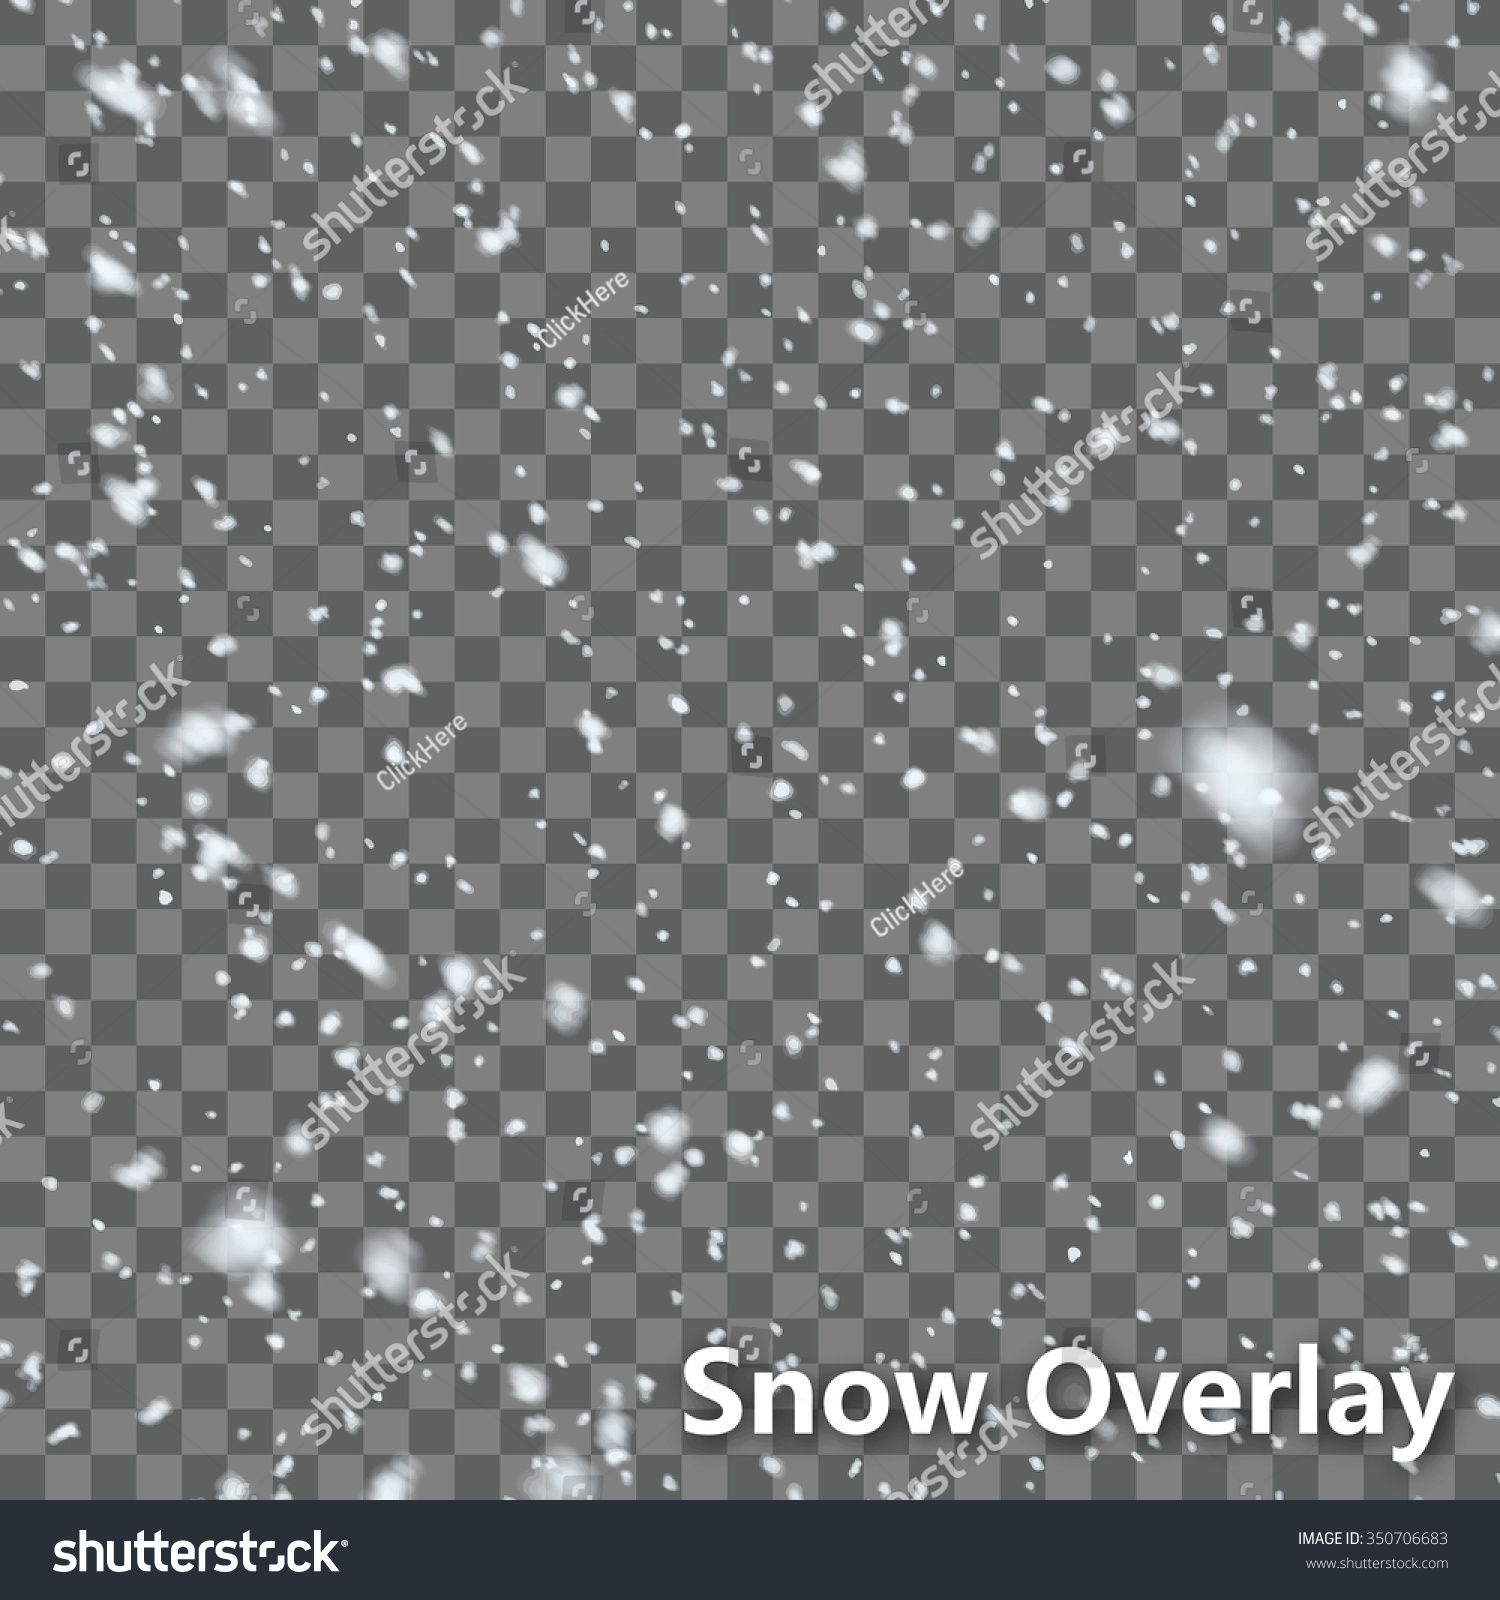 Isolated Falling Snow Auto Trace Effect | EPS10 Vector #350706683